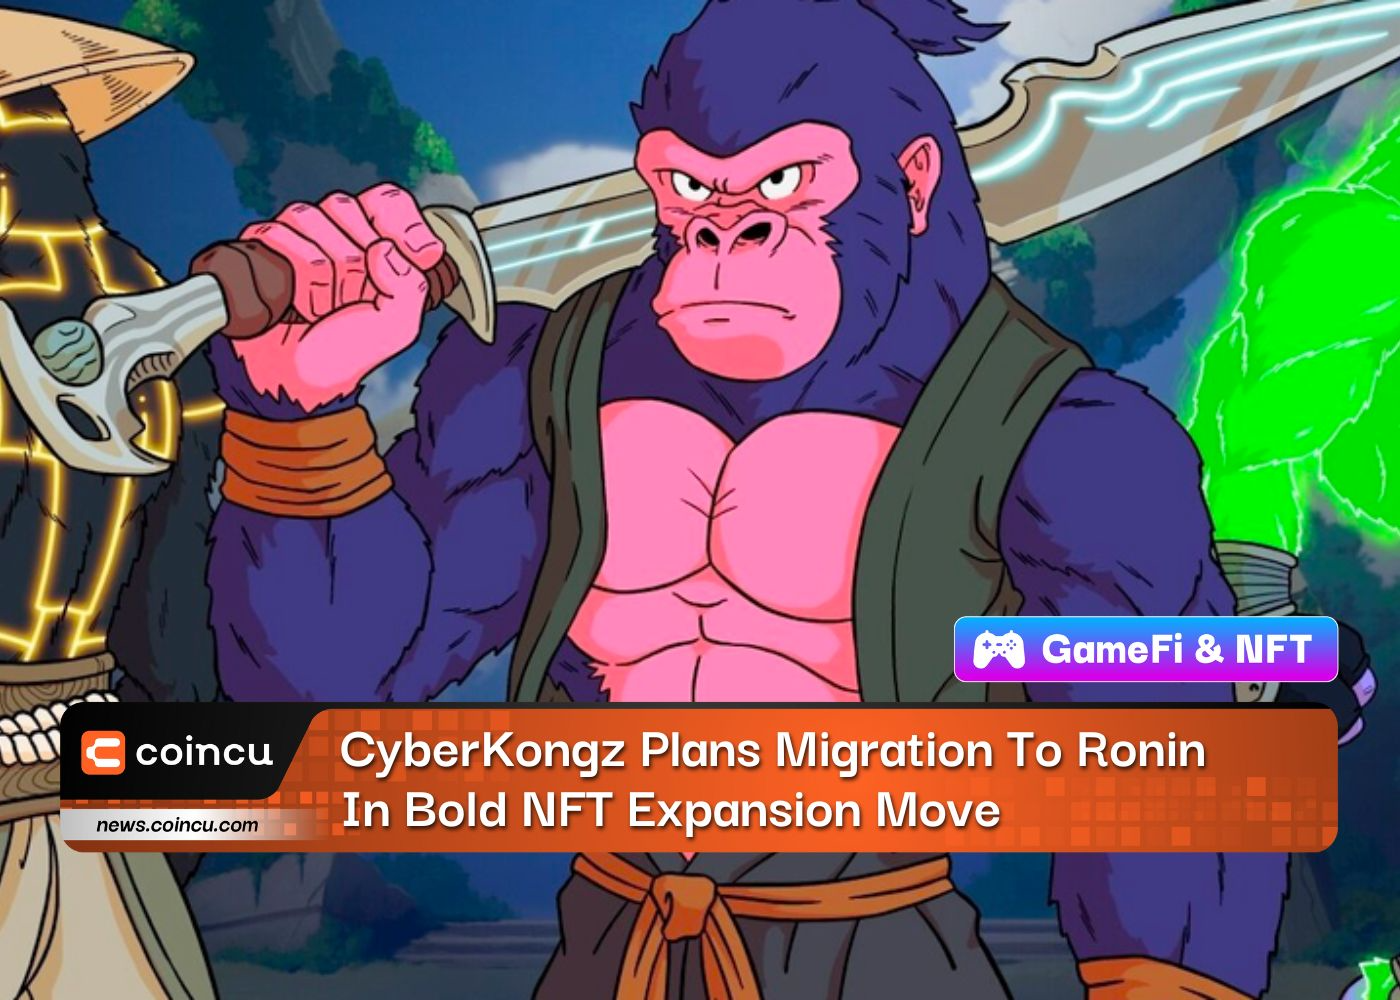 CyberKongz Plans Migration To Ronin In Bold NFT Expansion Move